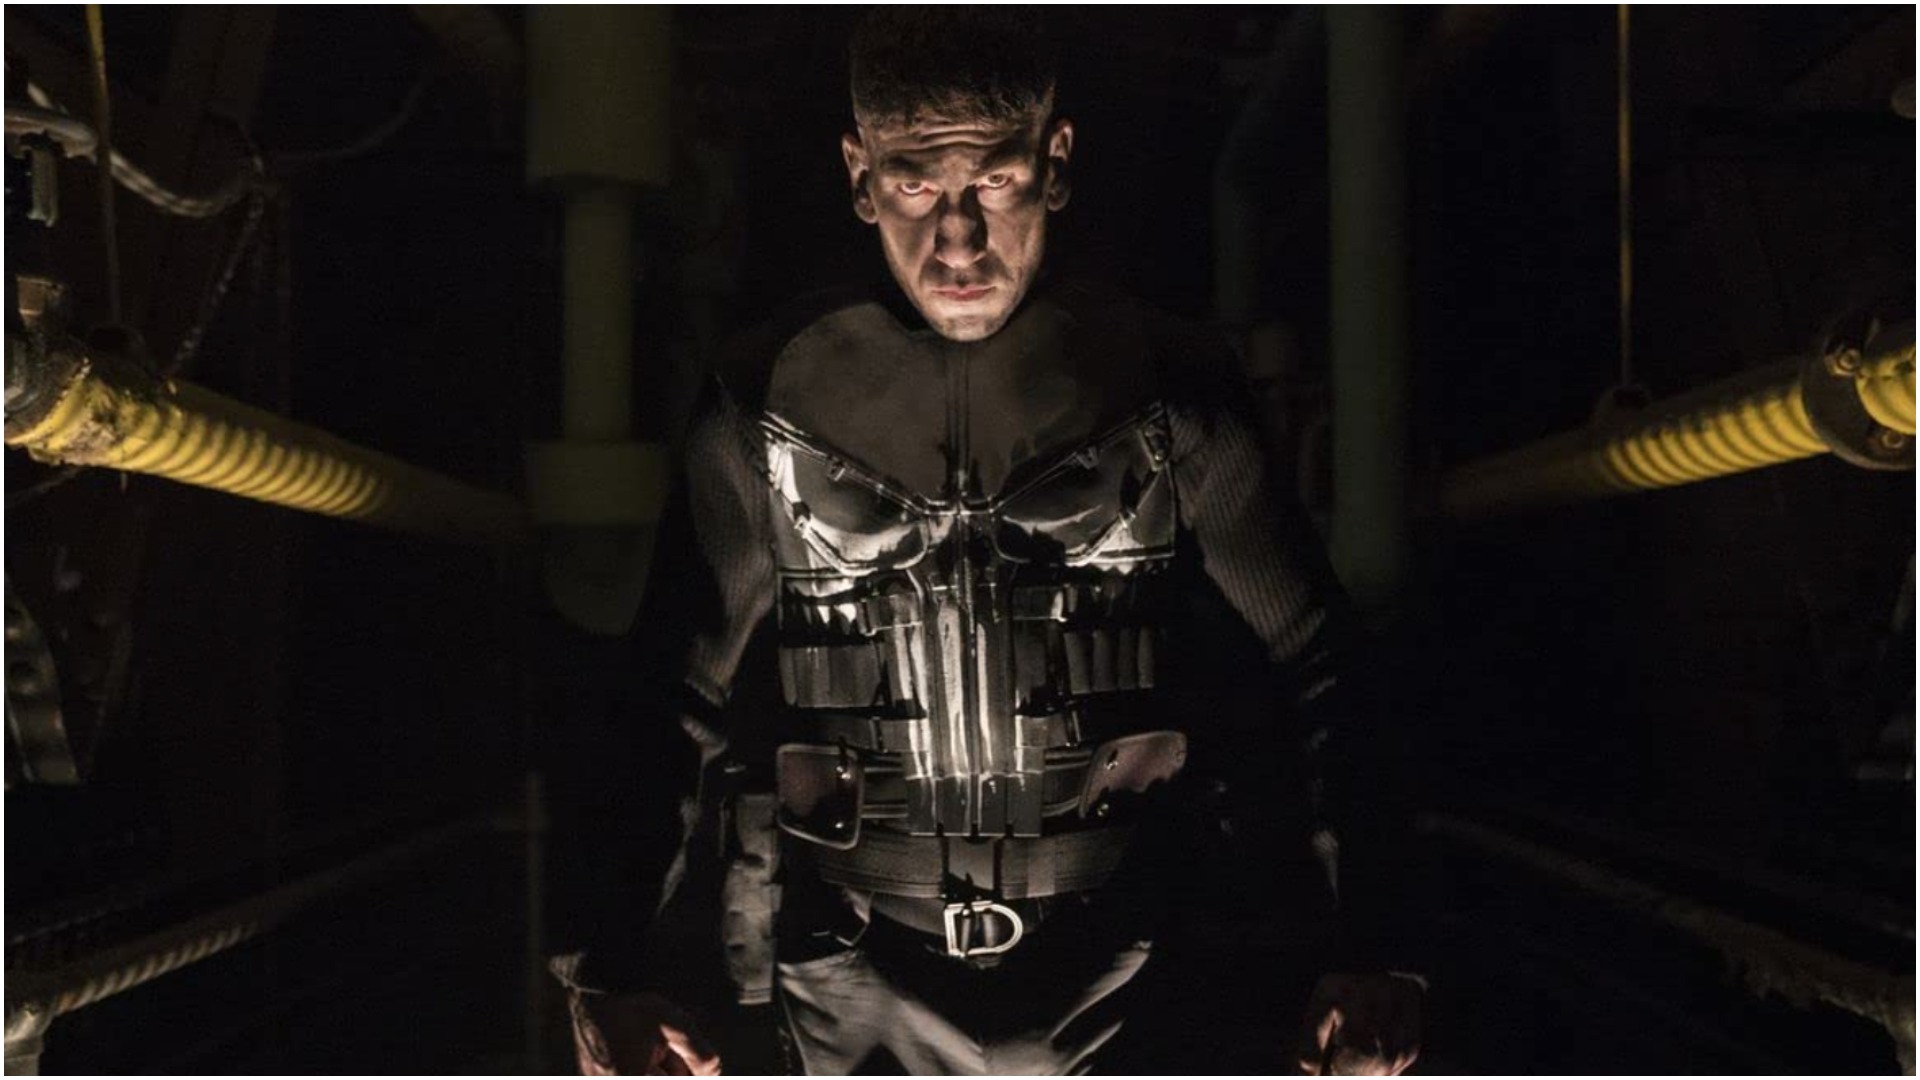 The Punisher: War Zone – Audio tracks and captions on Disney+ Brazil